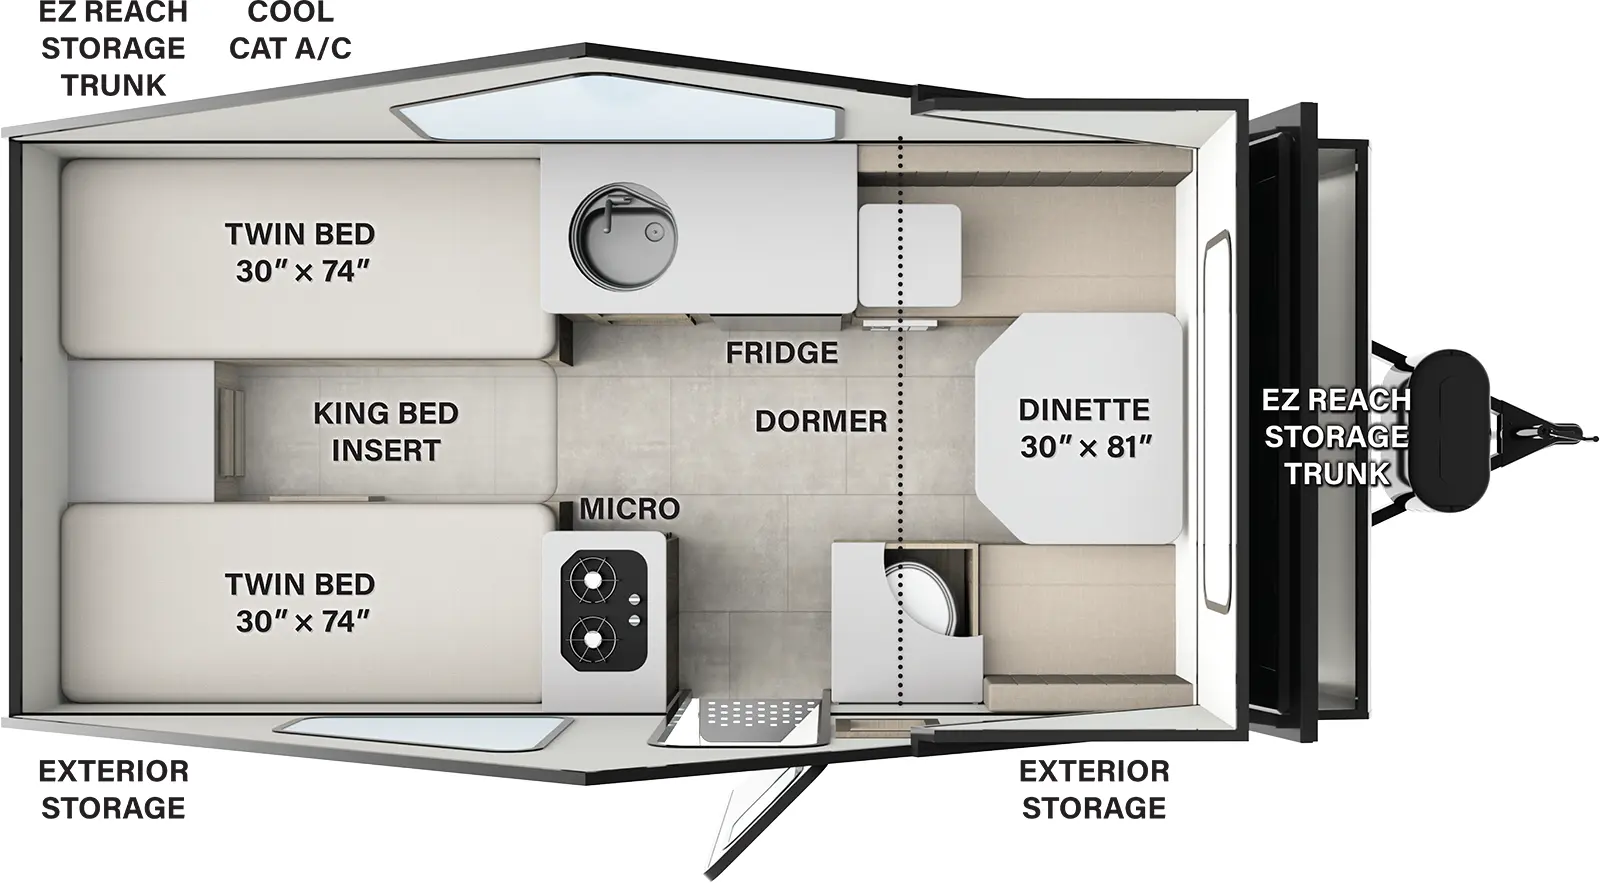 The A213HS has zero slideouts and one entry. Exterior features front and rear EZ reach storage trucks, and a Cool Cat A/C. Interior layout front to back: front dinette, off-door side cabinet with sink, and refrigerator, rear opposing twin beds with king bed insert, and door side cabinet with microwave and cooktop, entry door, and toilet.